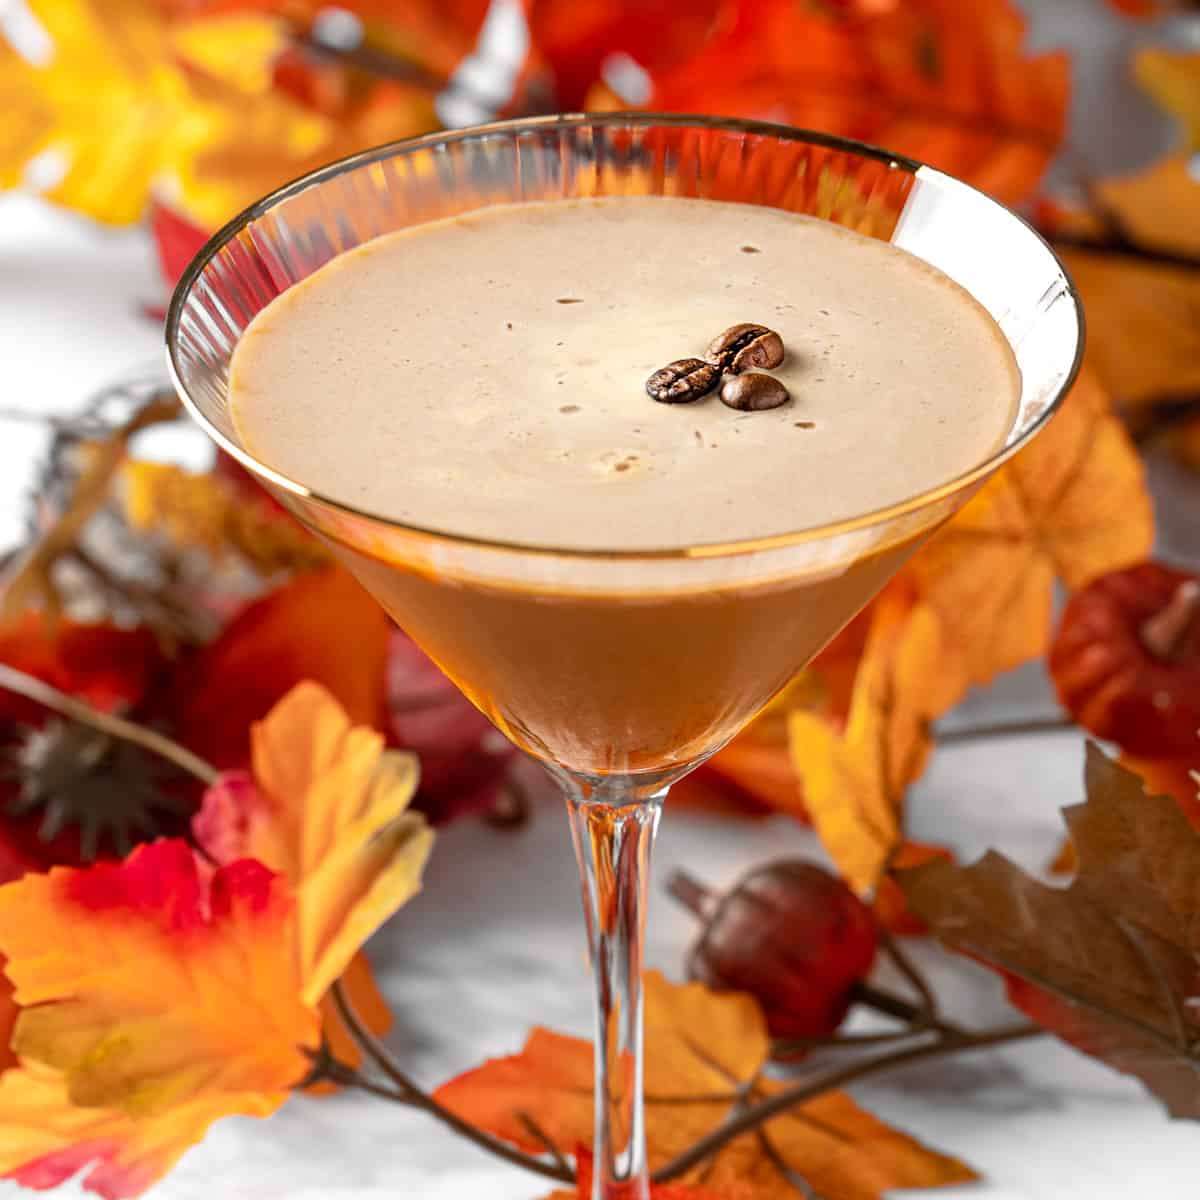 A pumpkin espresso martini in martini glass garnished with espresso beans and surrounded by Fall leaves.